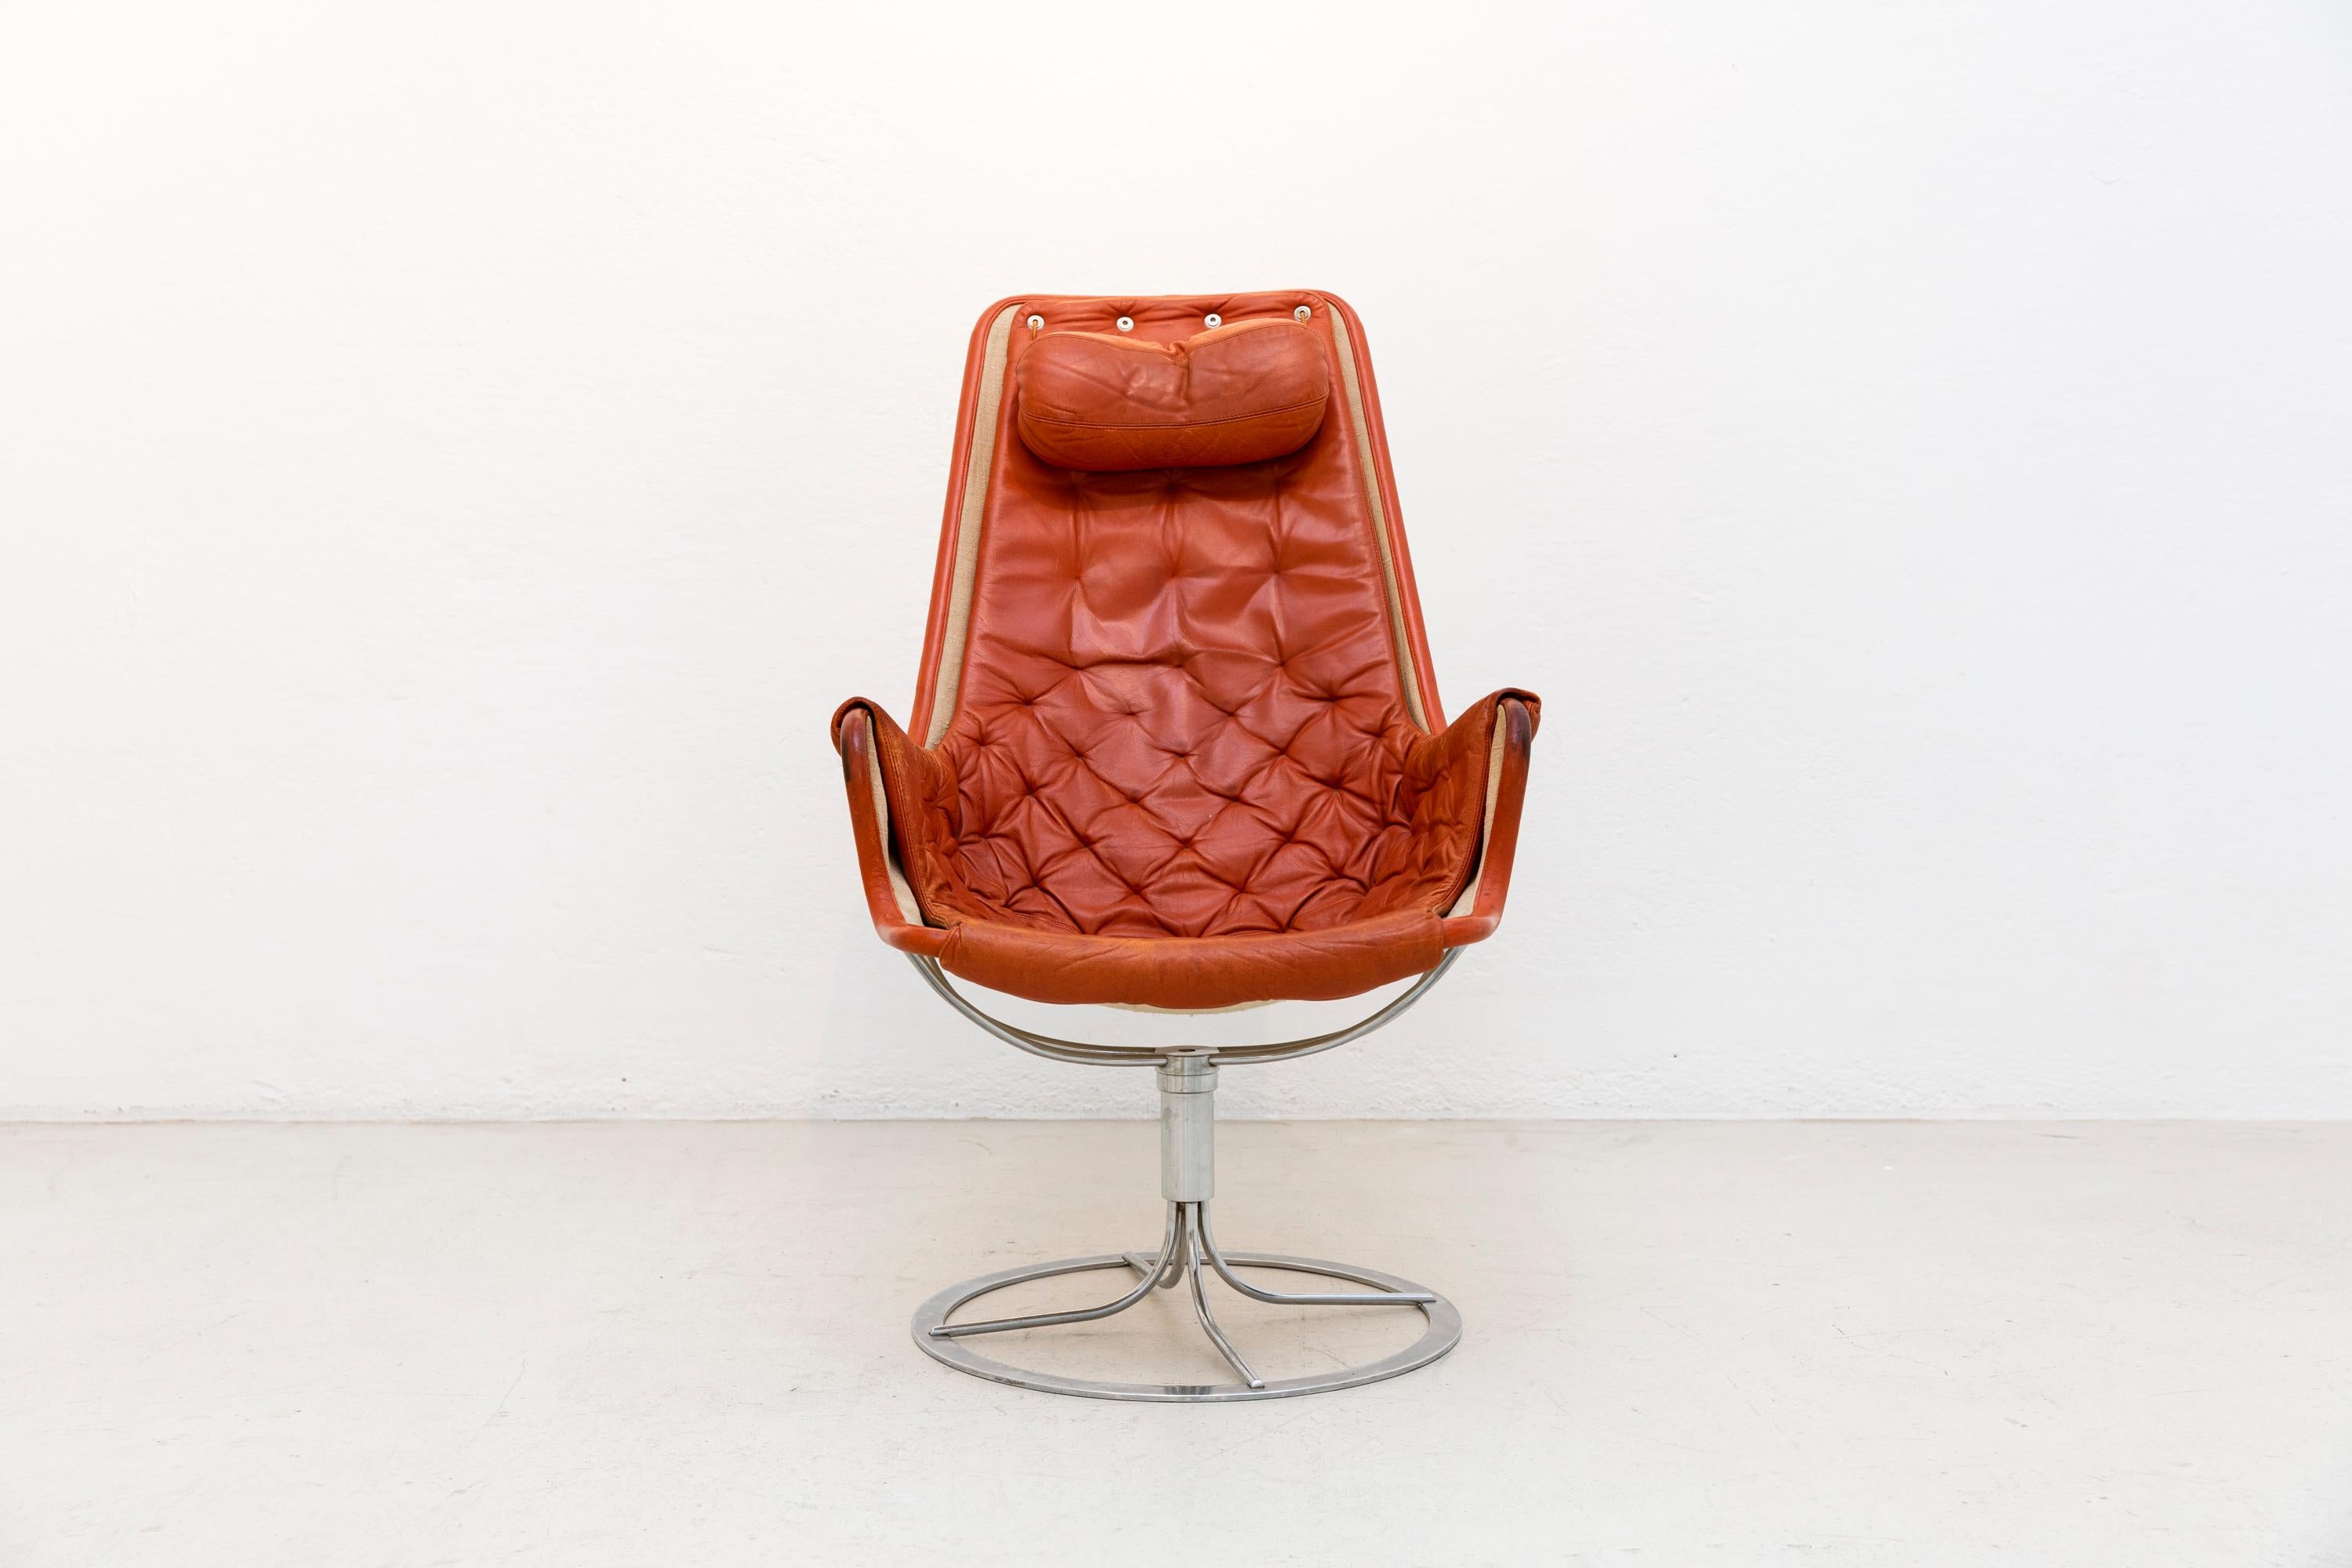 Bruno Mathsson real leather armchair, Jetson from 1964.
A lounge chair on chrome swivel, beautifully patinated genuine leather in light brown. The chair is in good working condition, with visible signs of wear on the leather / s. Detailed photos.